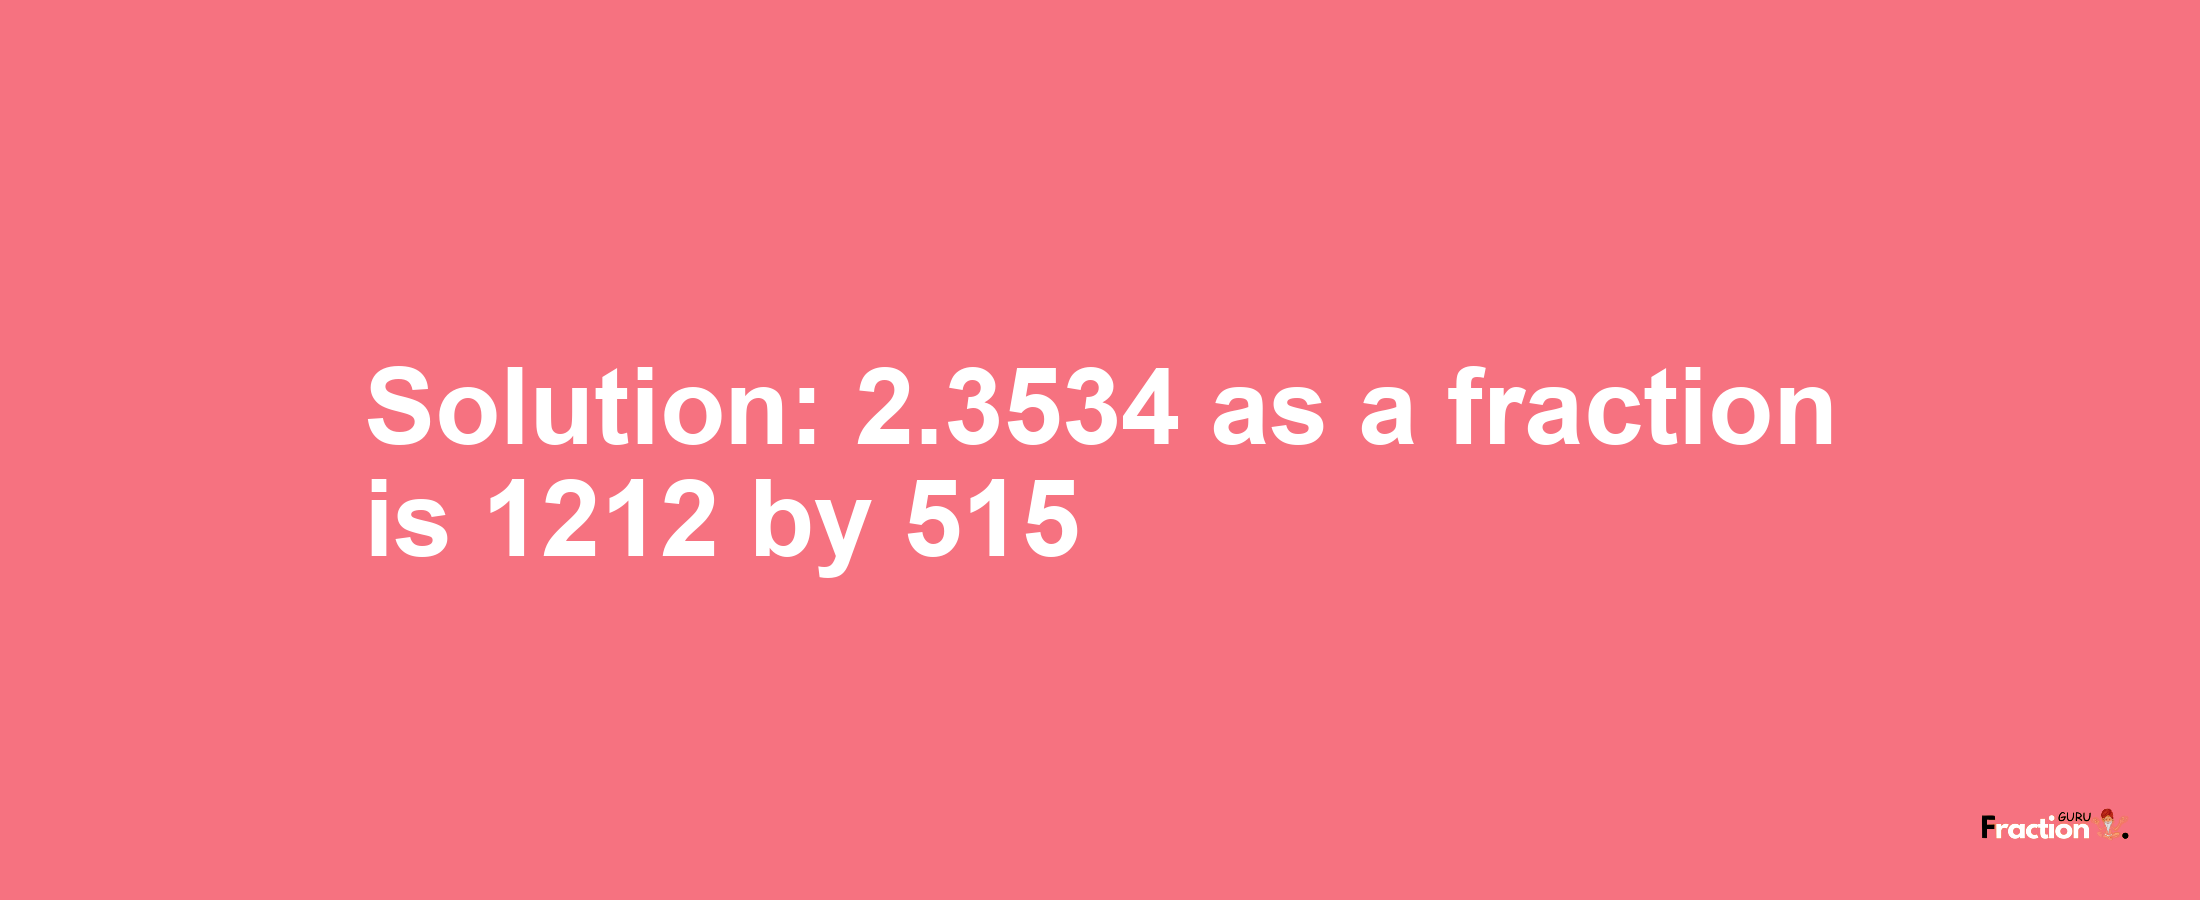 Solution:2.3534 as a fraction is 1212/515